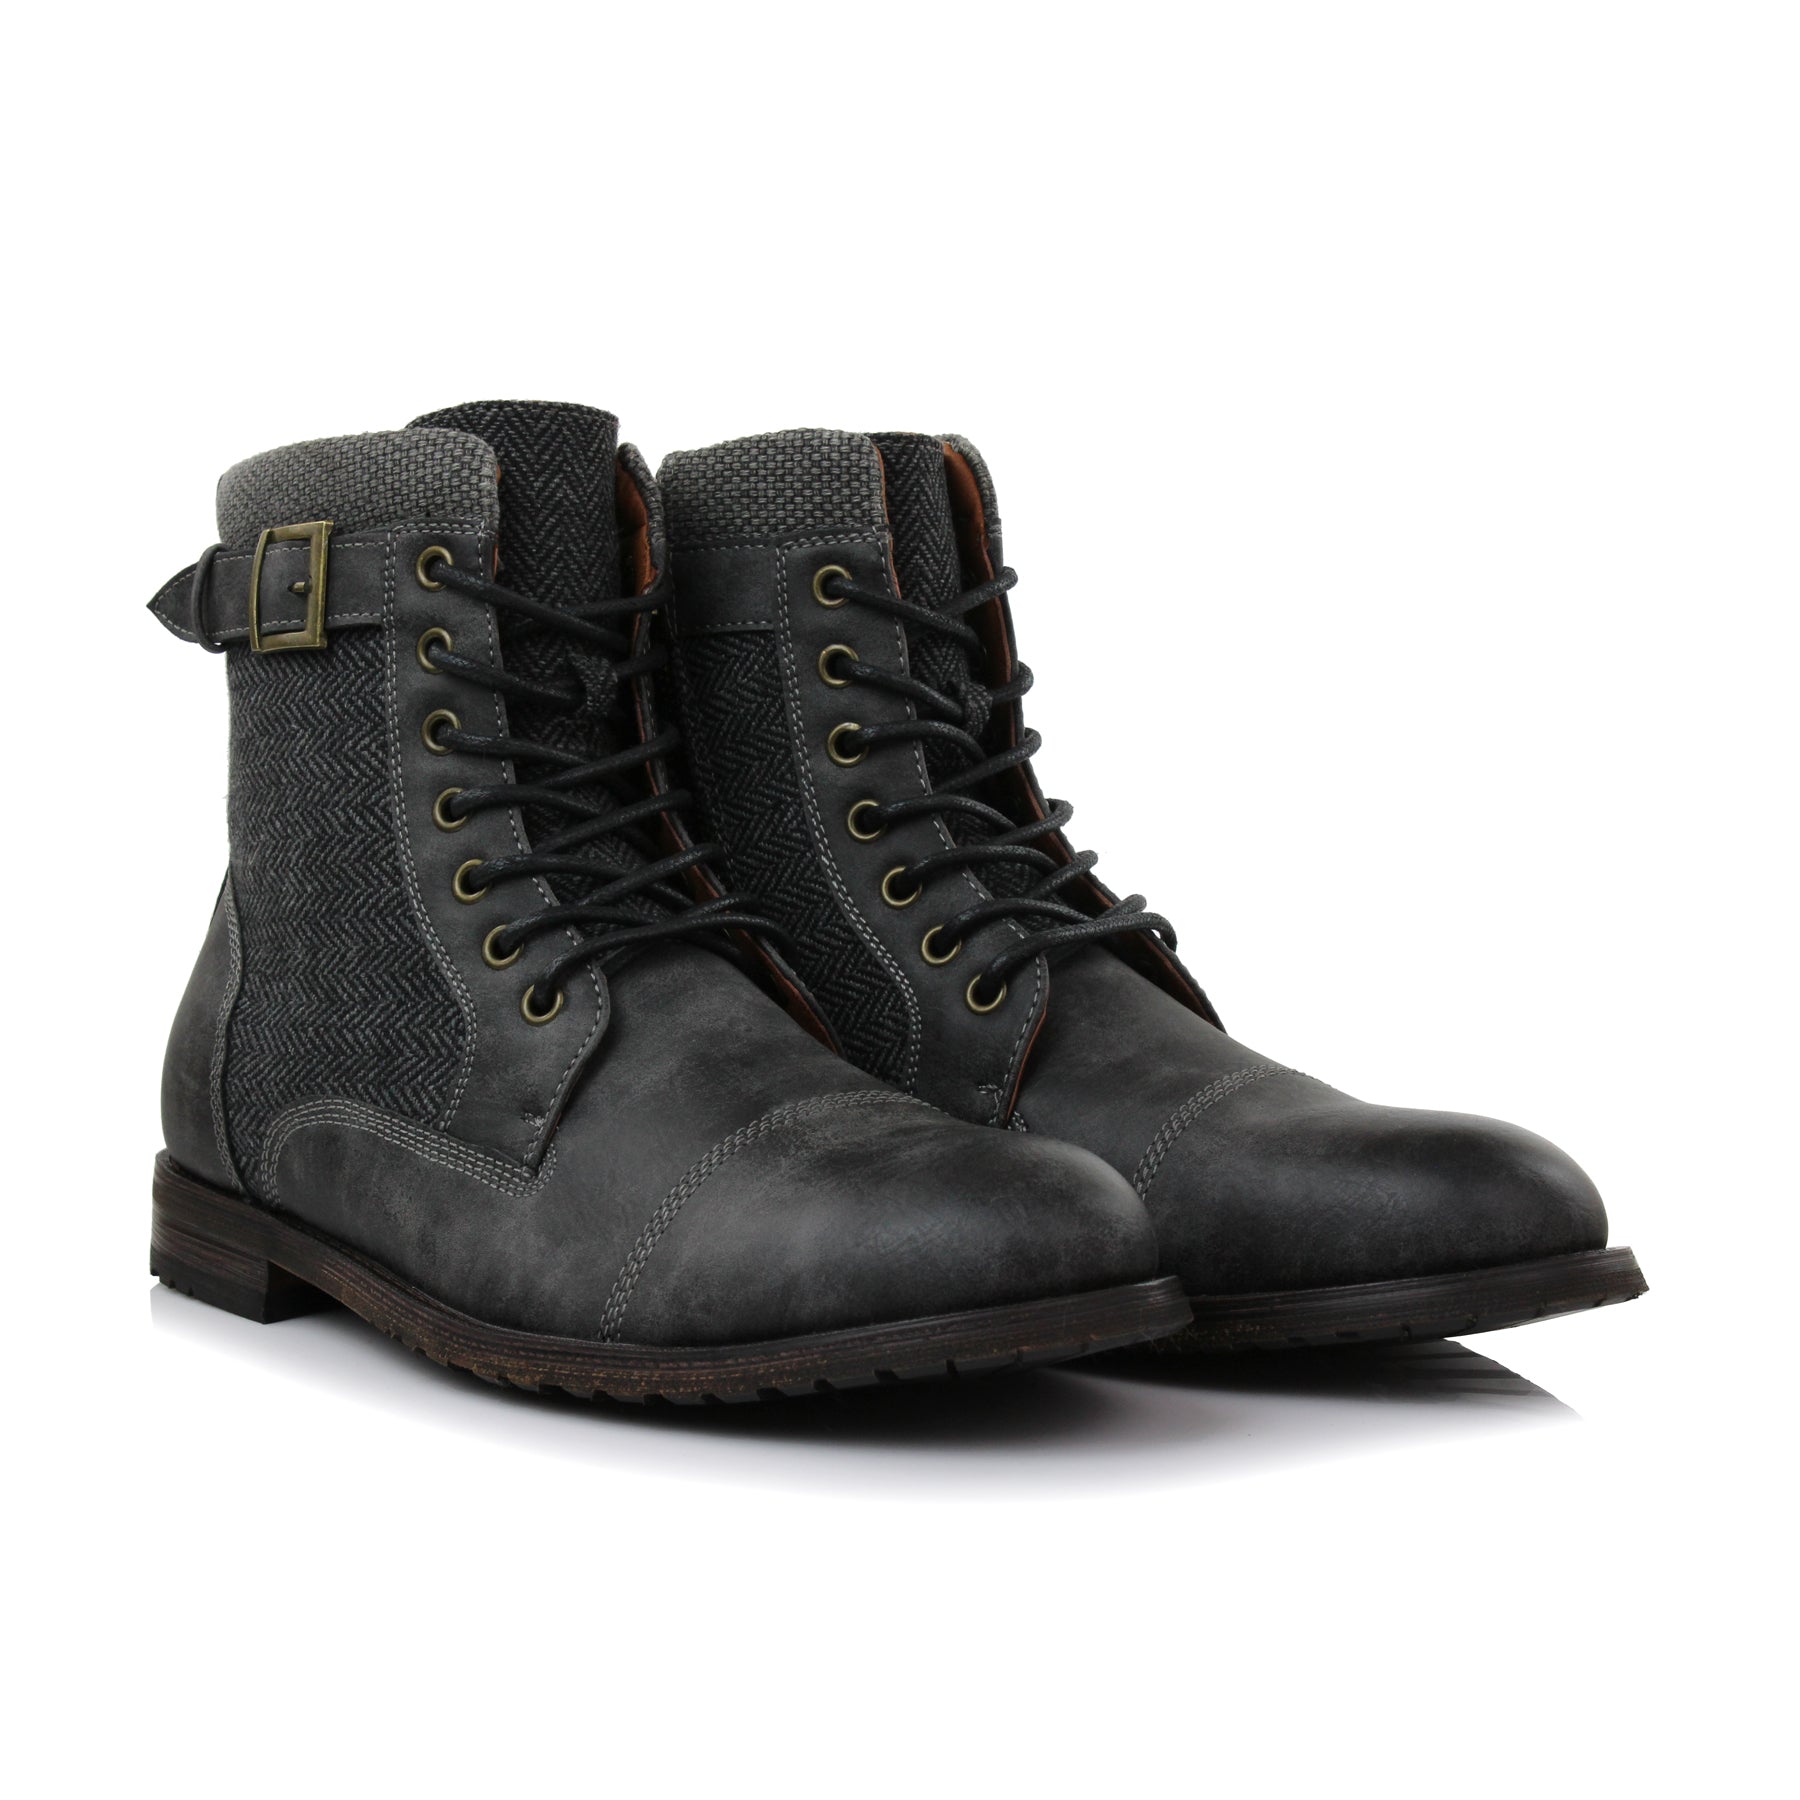 Vegan Leather Boots | ELIJAH in Charcoal | Men's Stylish Zippered 